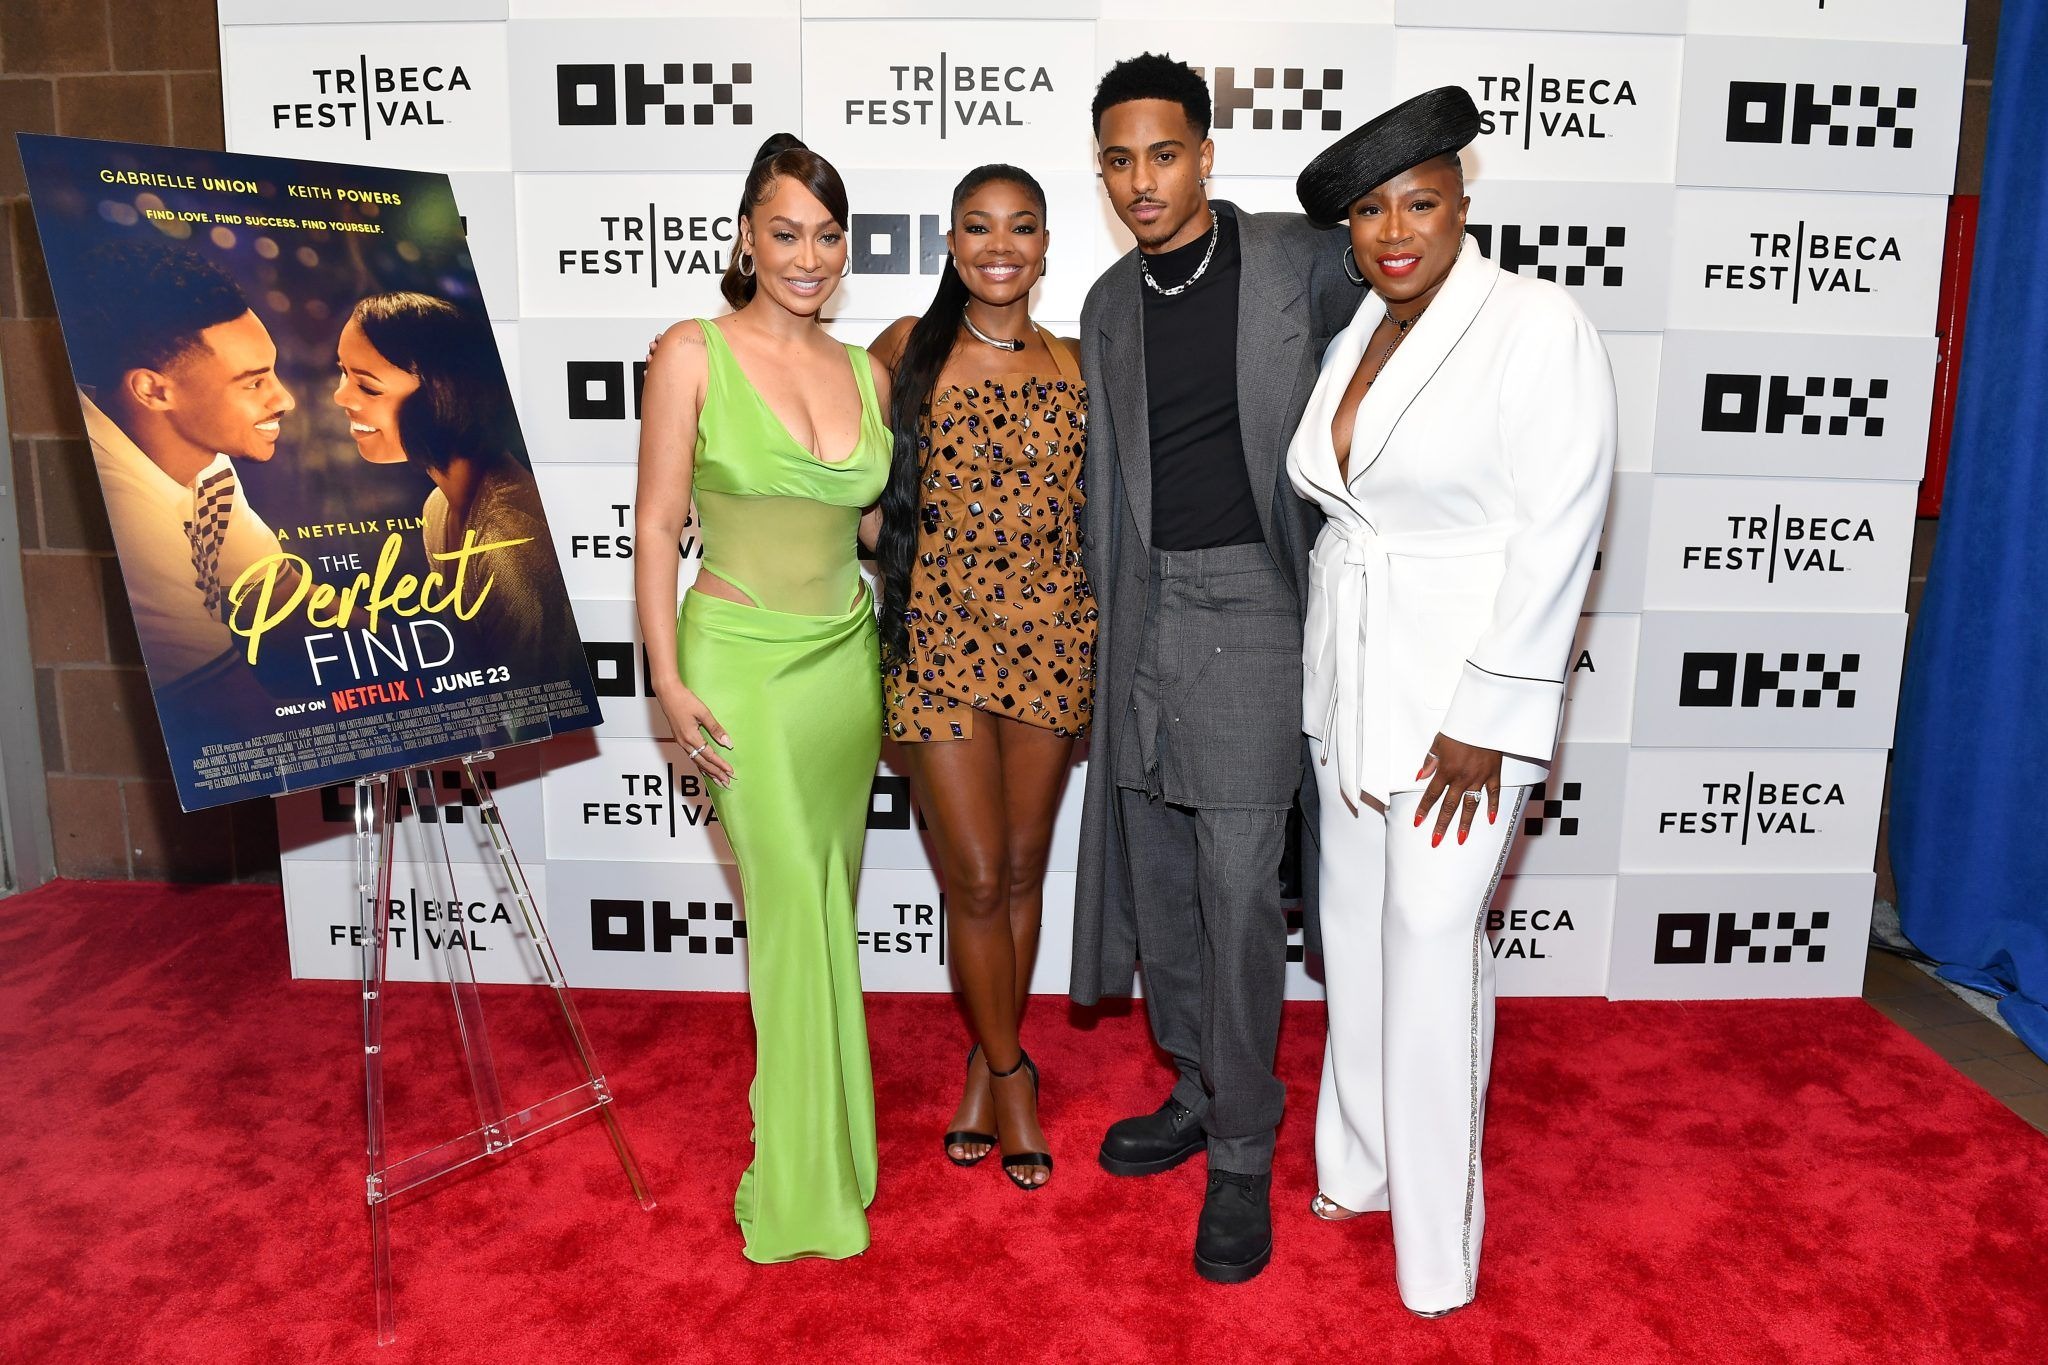 (L-R) La La Anthony, Gabrielle Union, Keith Powers, and Aisha Hinds attend The Perfect Find World Premiere at Tribeca Film Festival at BMCC Tribeca Center of Performing Arts on June 14, 2023 in